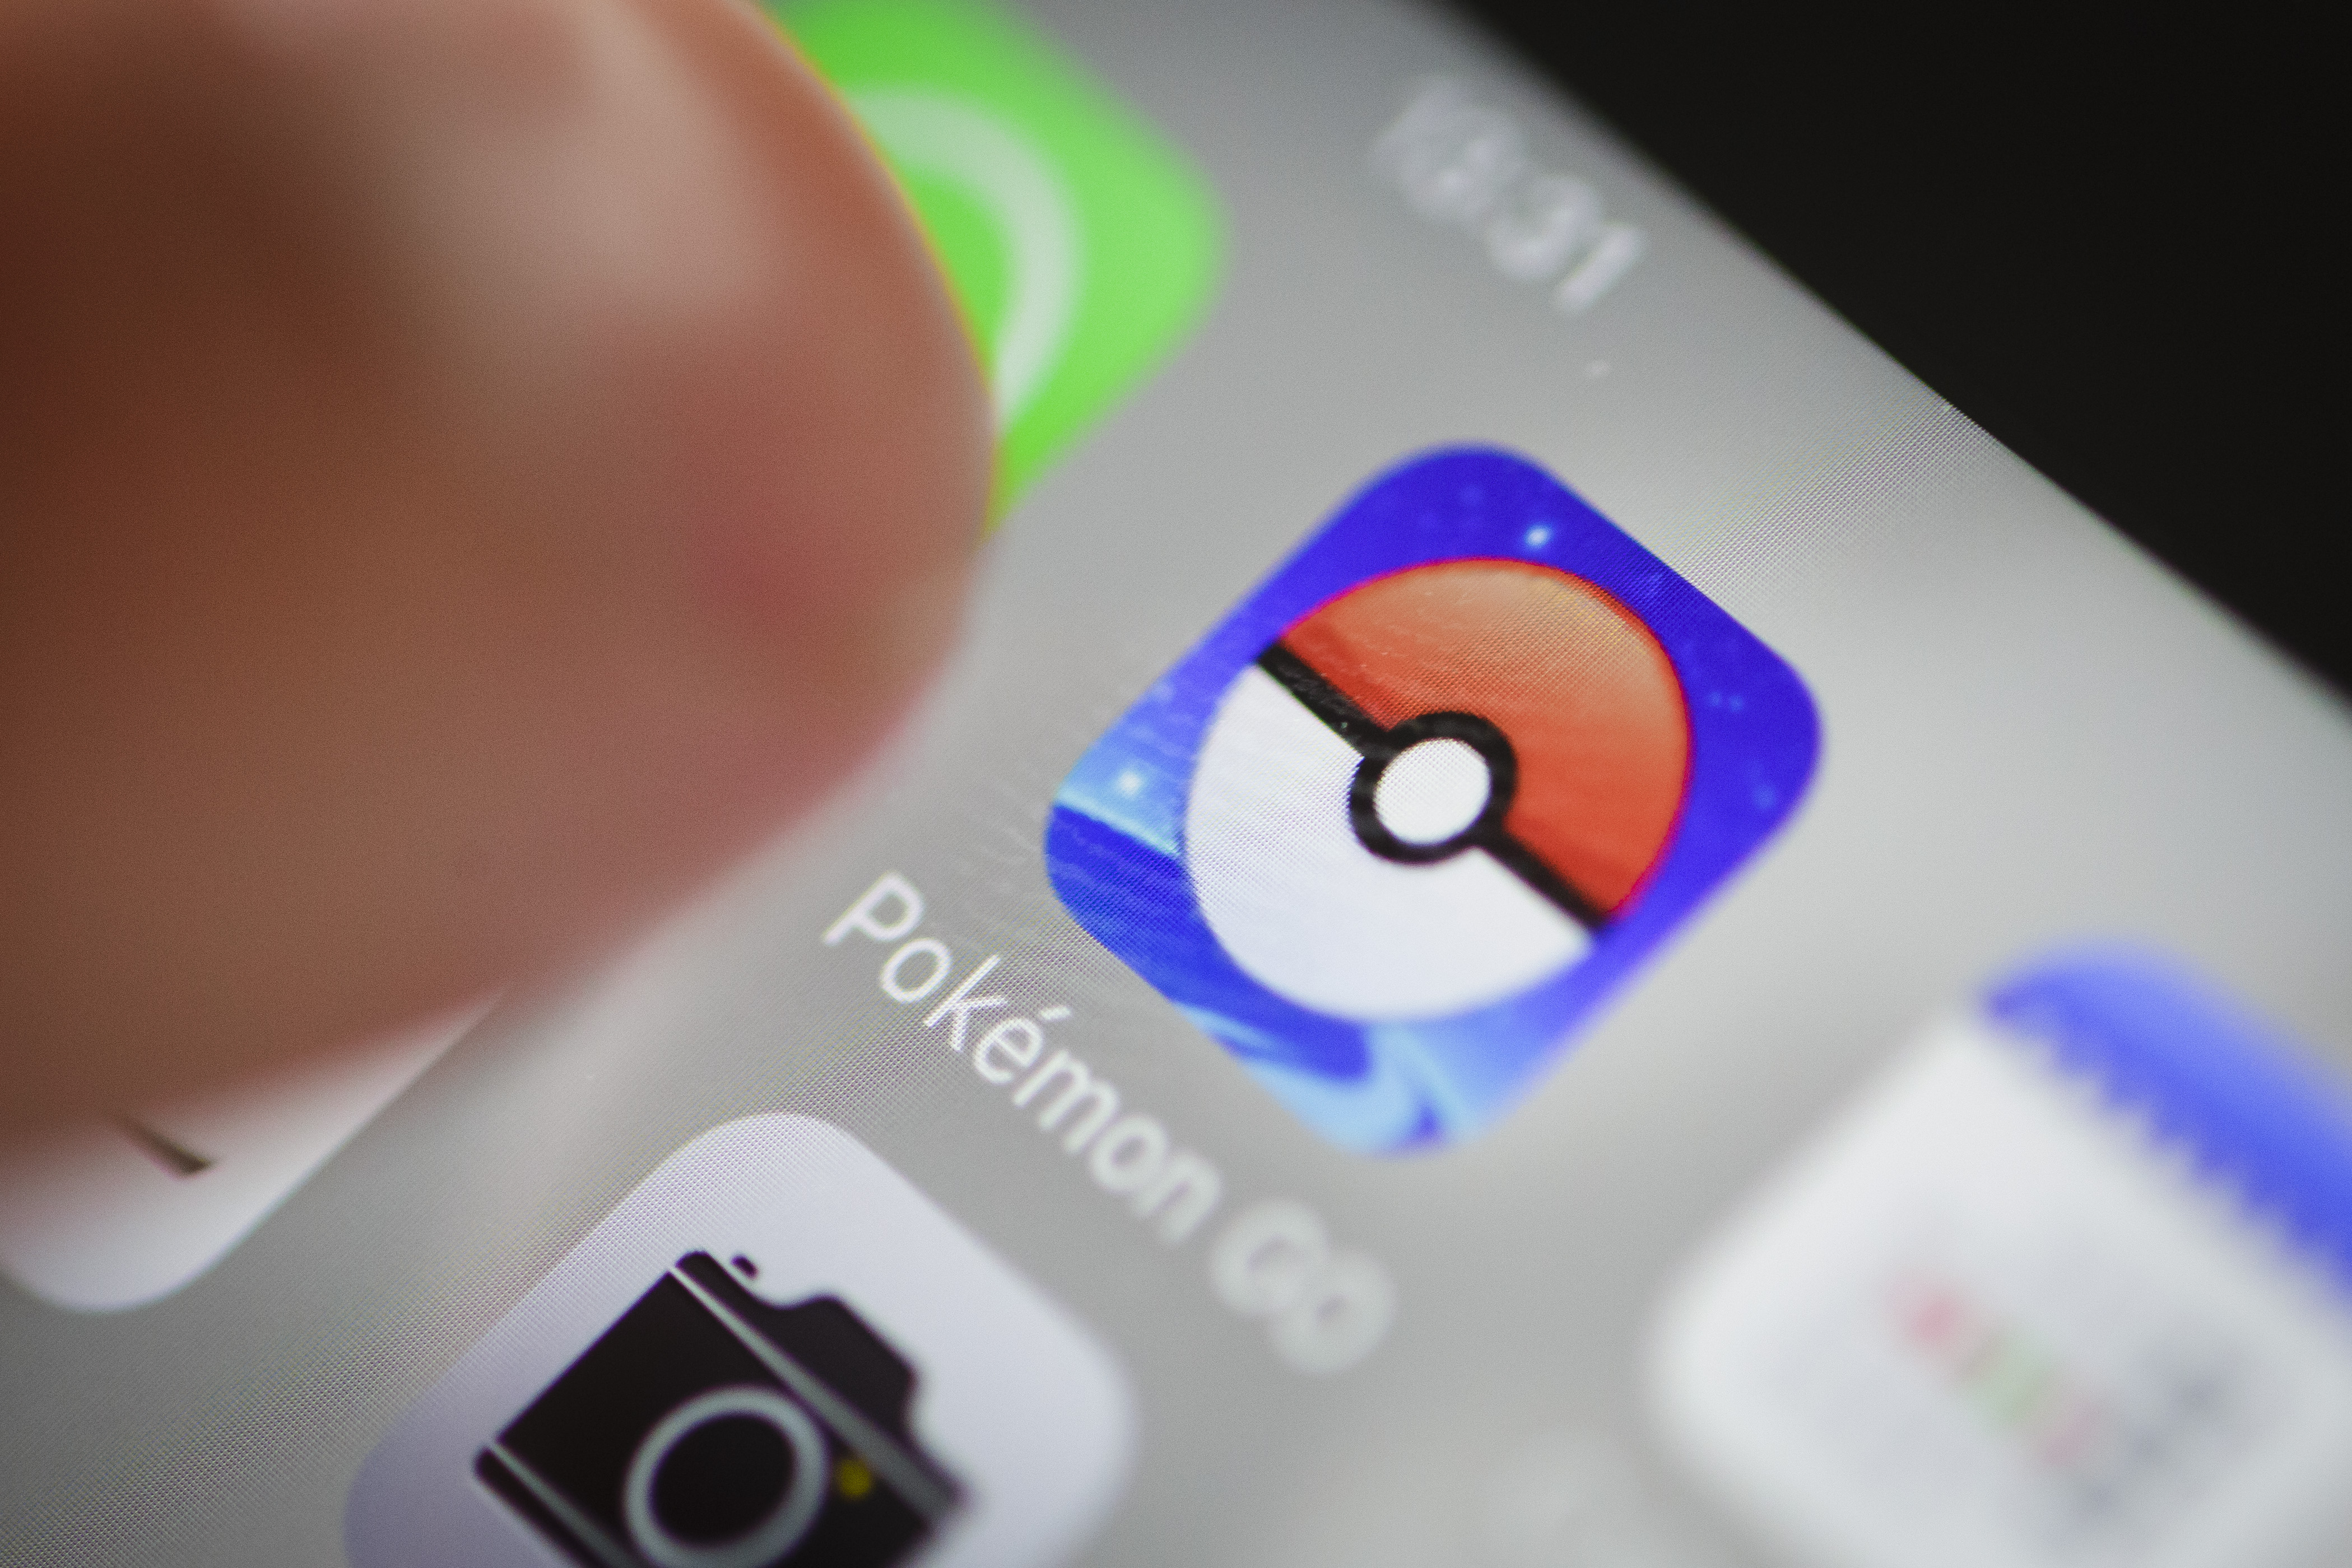 Pokemon GO game on a smartphone, in Berlin, on July 14, 2016. (Thomas Trutschel—Getty Images)